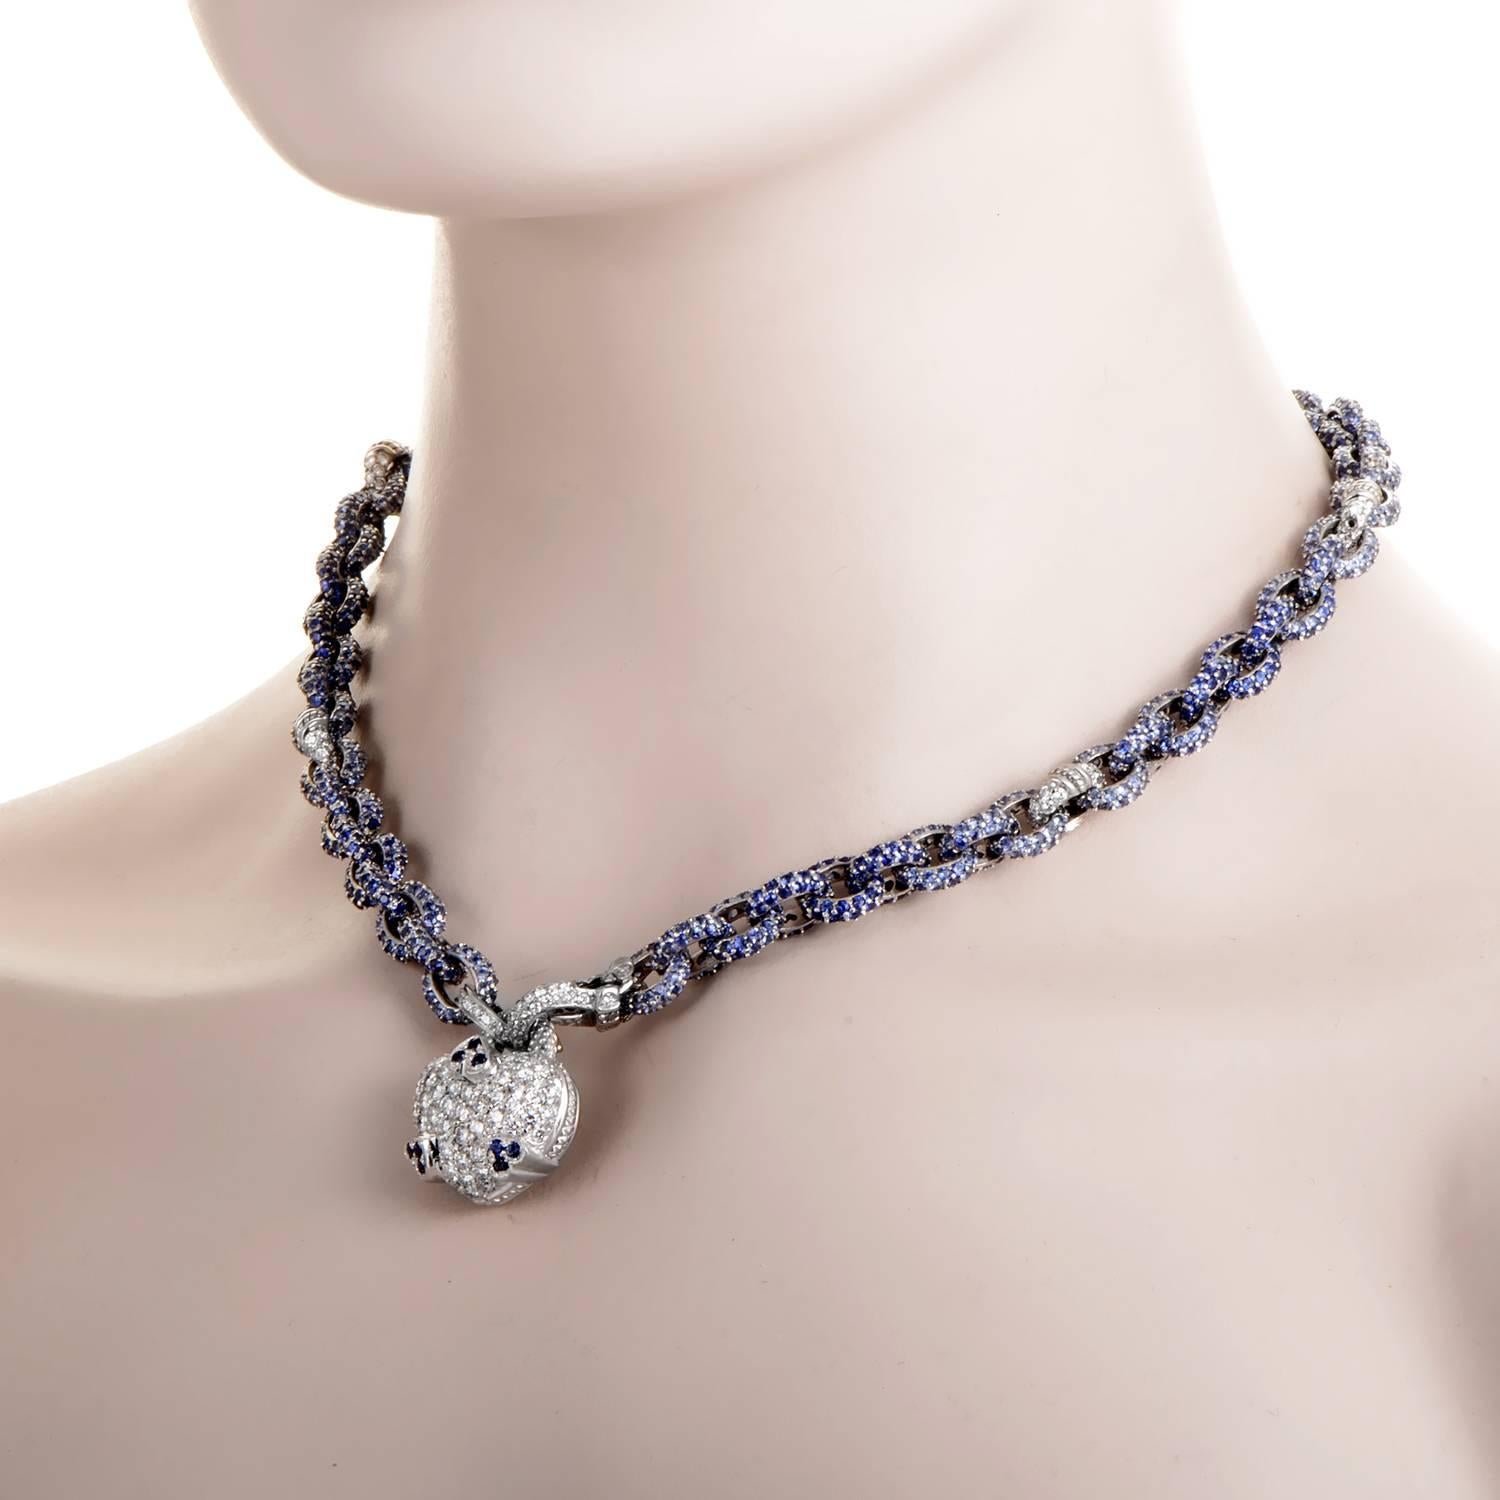 Precious gemstones take center stage in this decadent design from Judith Ripka. The necklace is made of 18K white gold and features links paved with sapphires and diamonds. Lastly, a heart-shaped pendant dangles from the necklace and is also paved